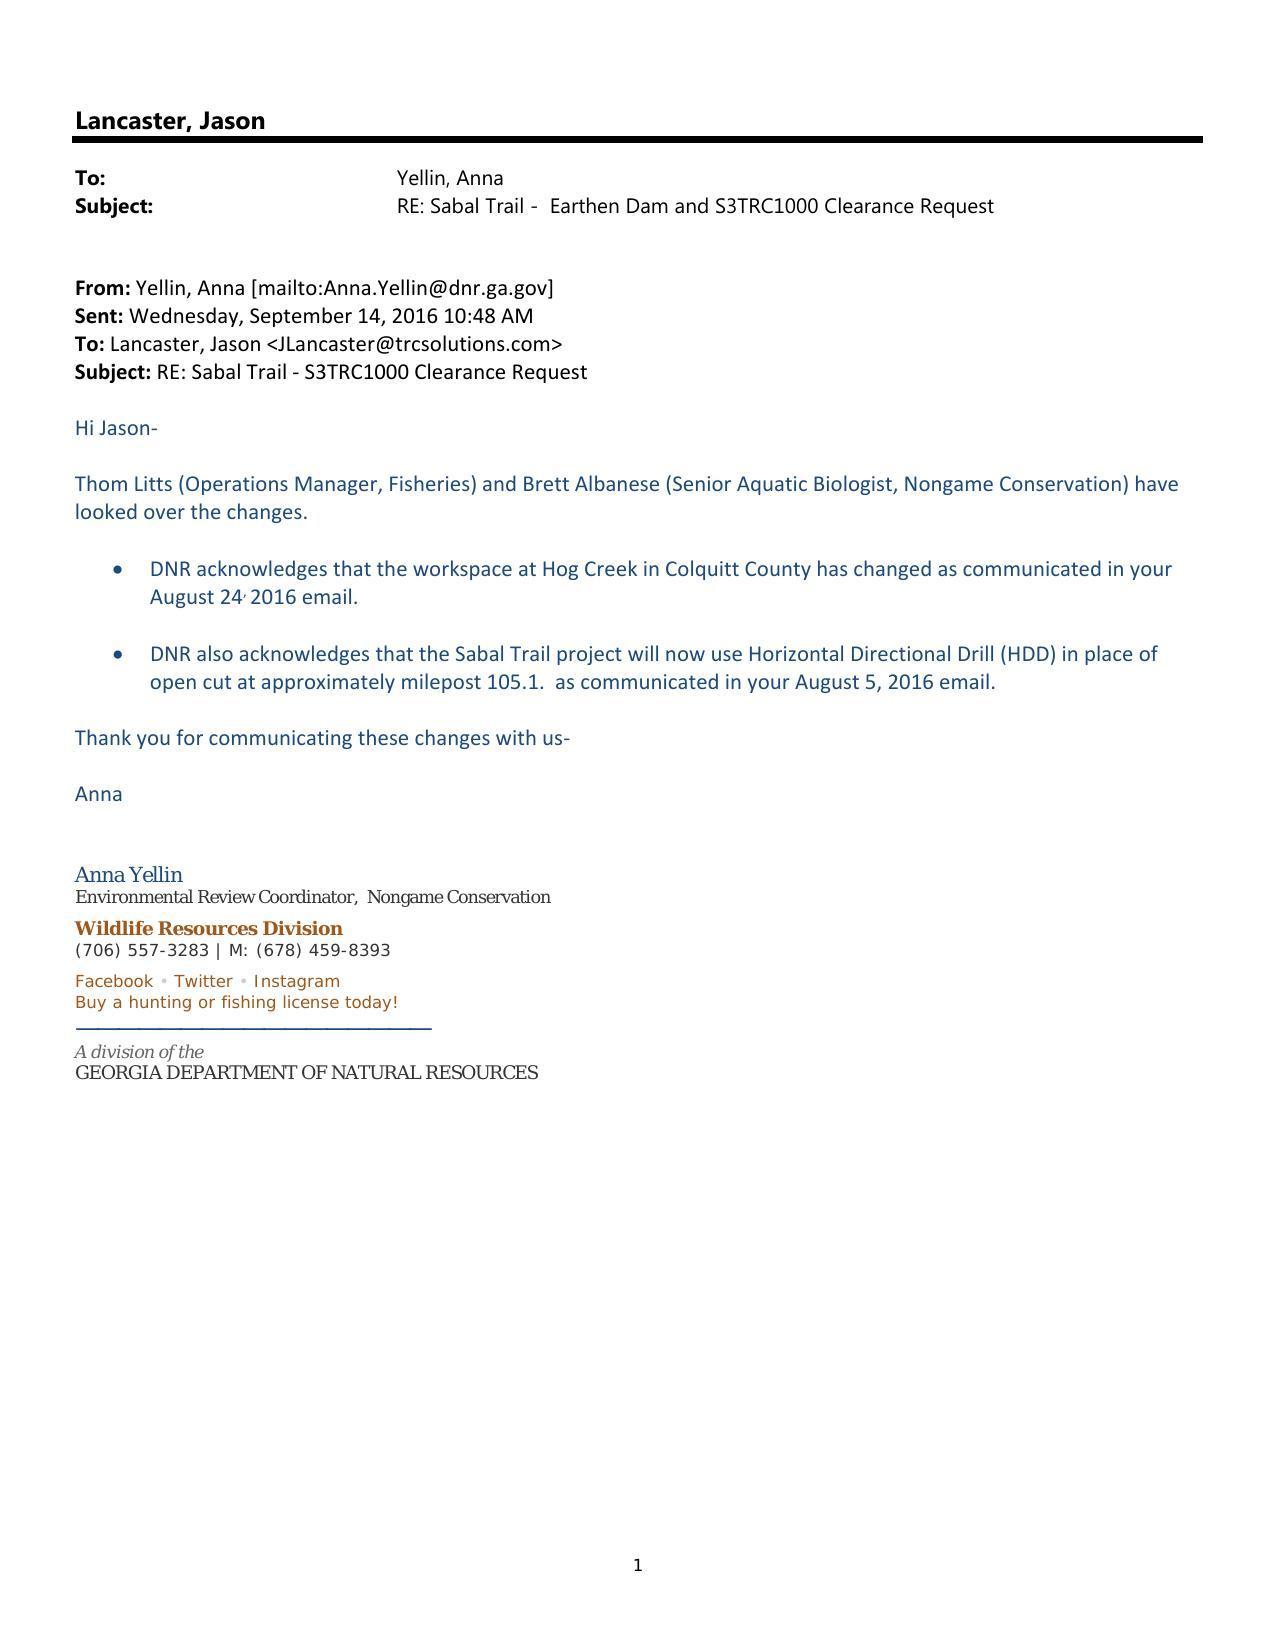 GA-DNR WRD 2016-09-24 acknowledges Earthen Dam and S3TRC1000 changes